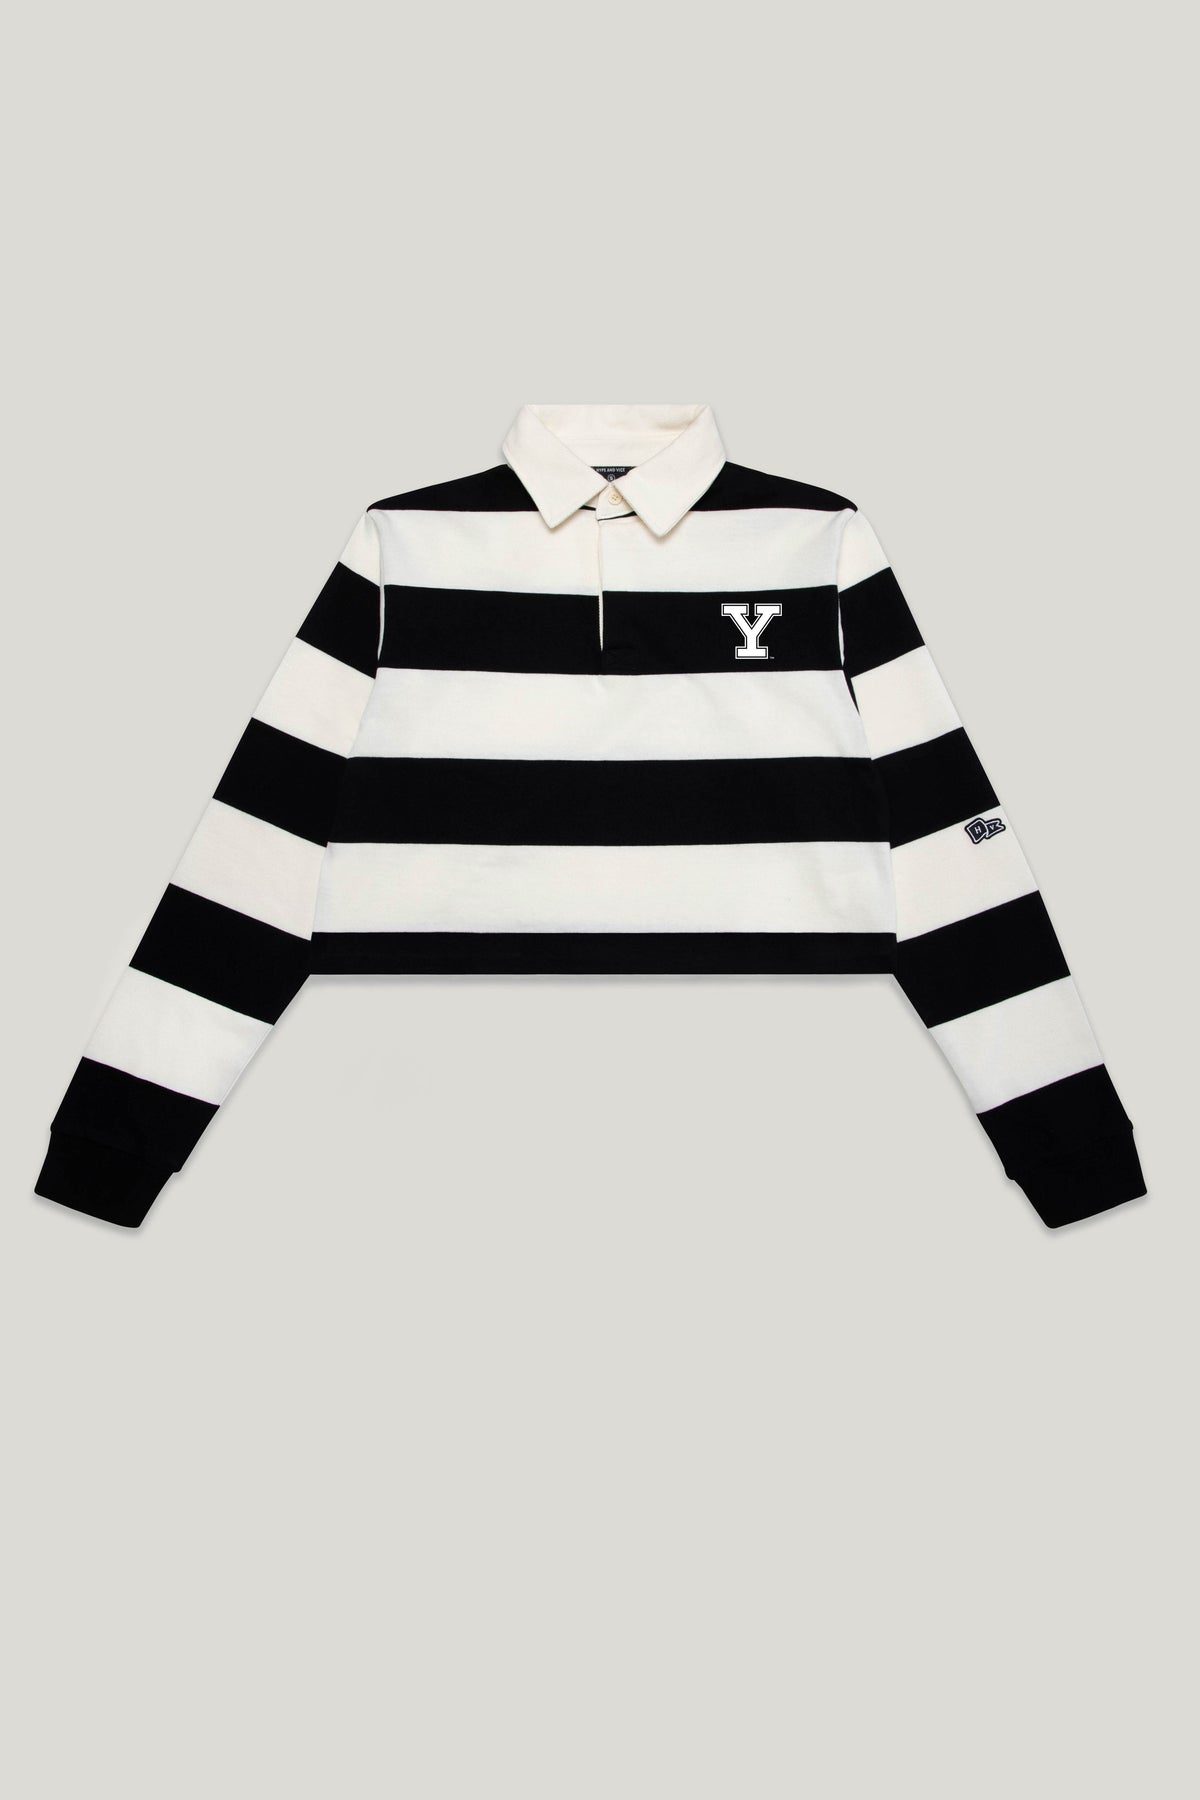 Yale University Rugby Top